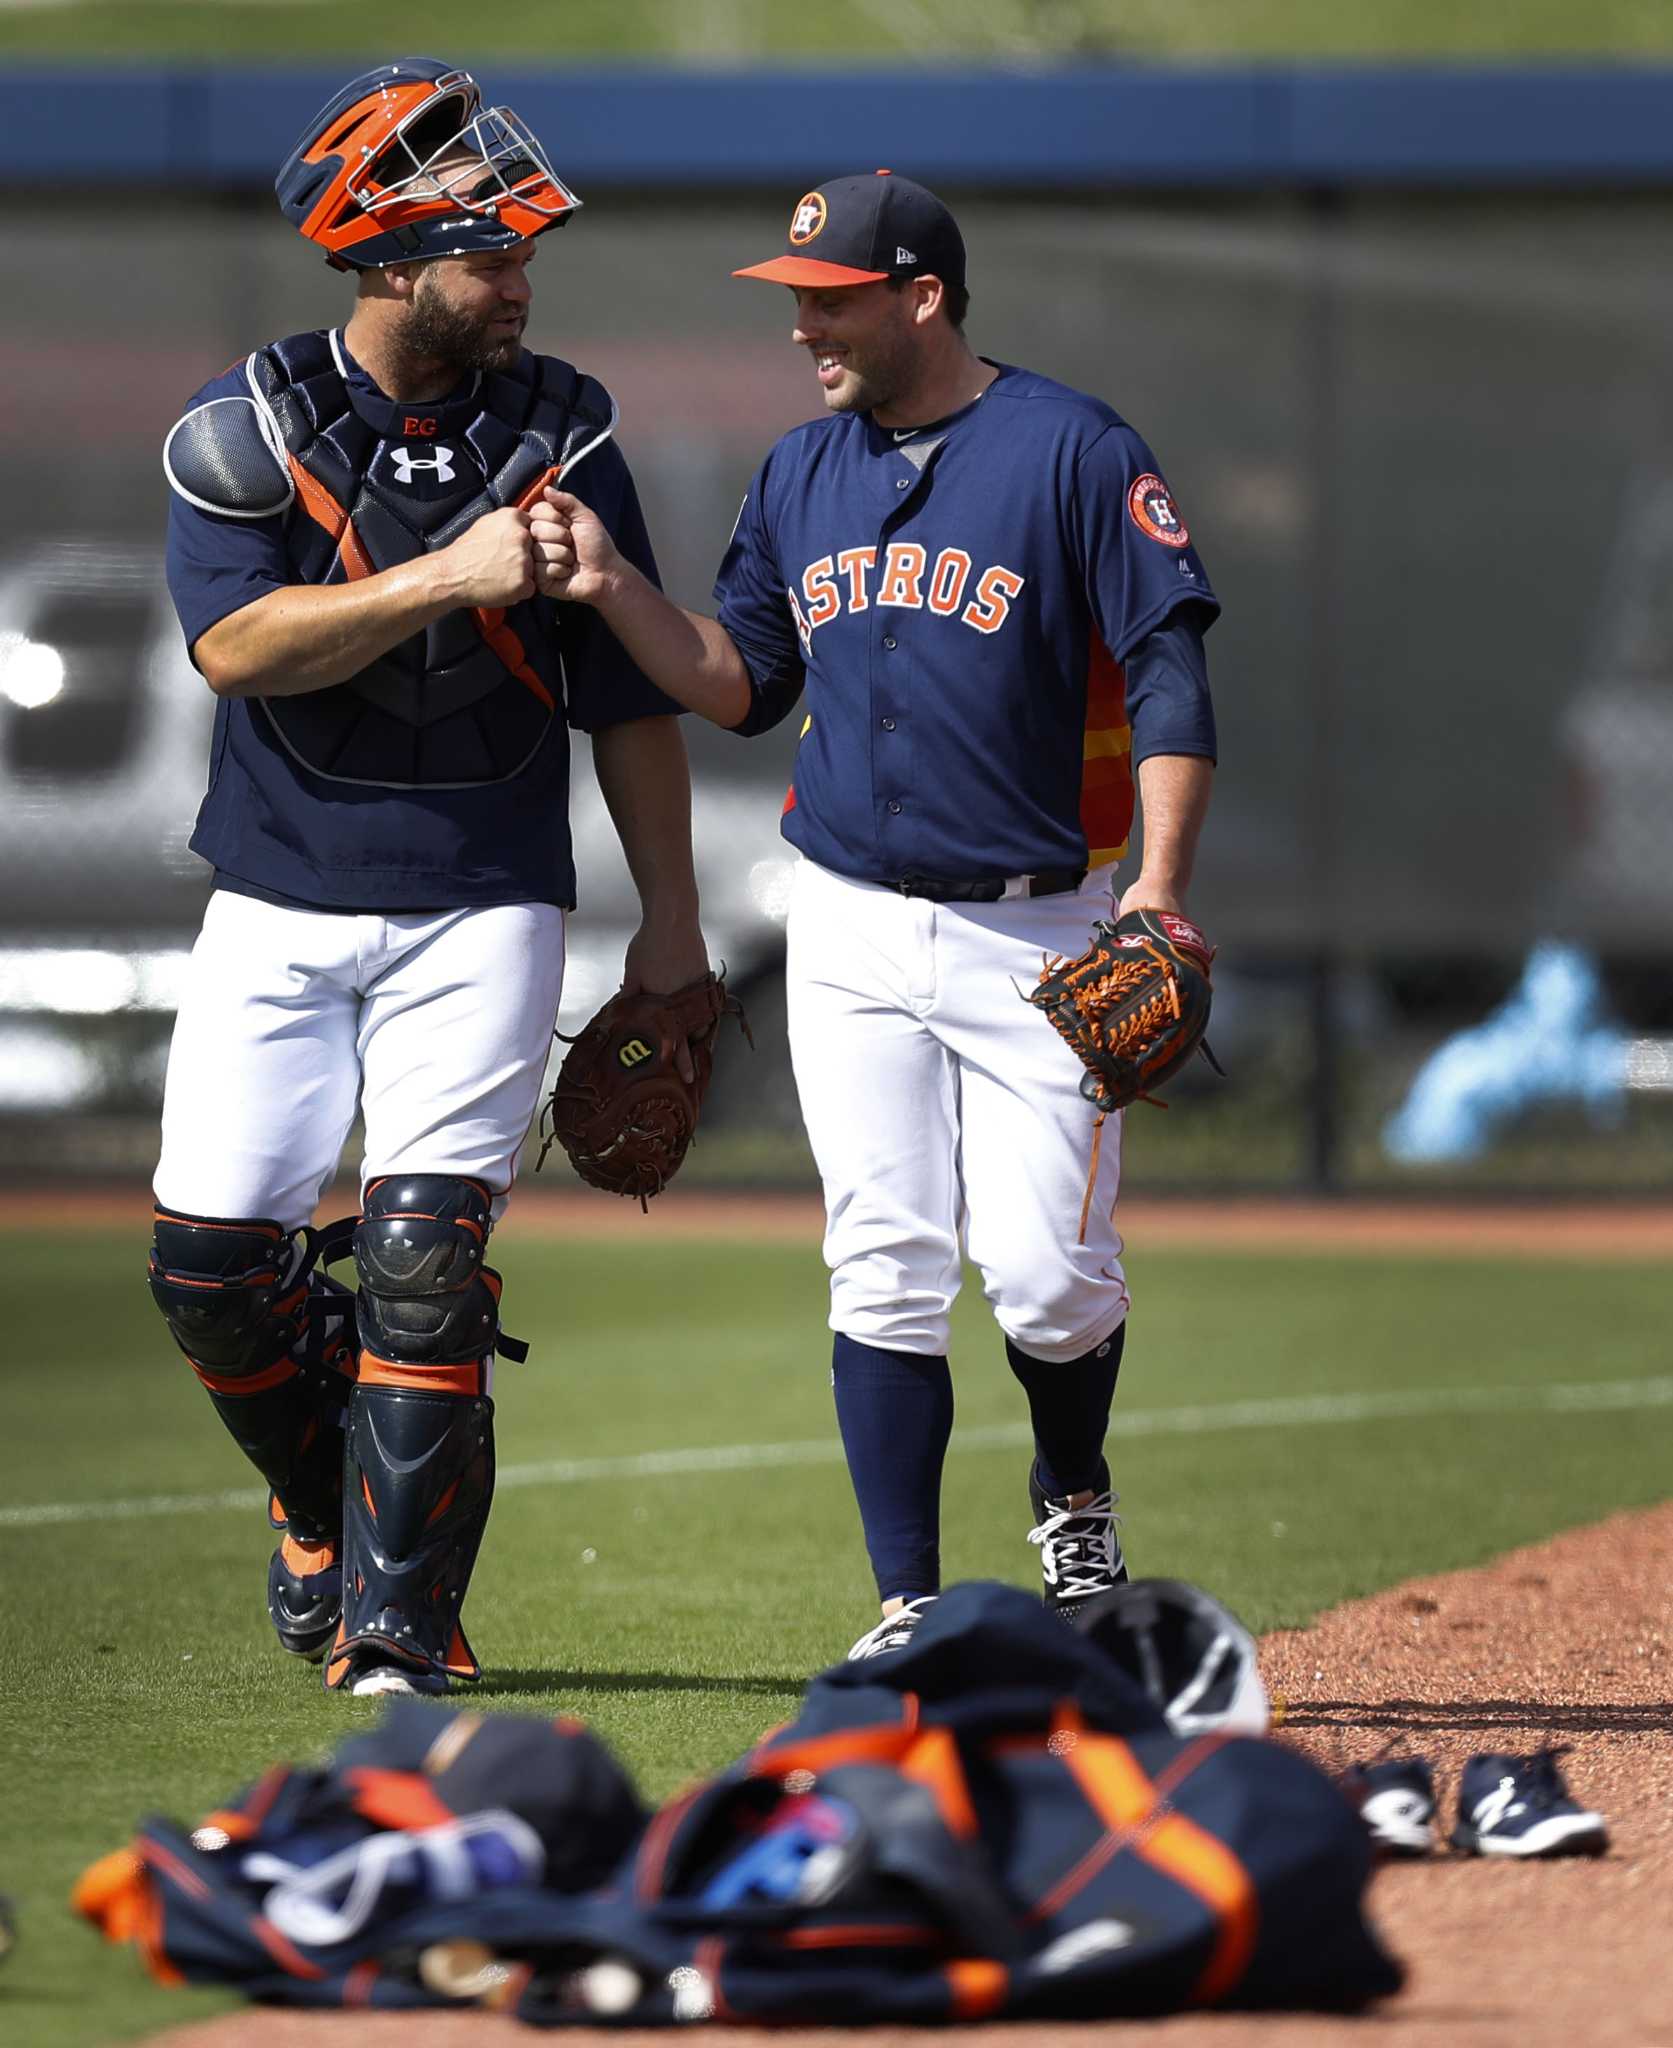 Astros' Evan Gattis to catch more than traditional backup